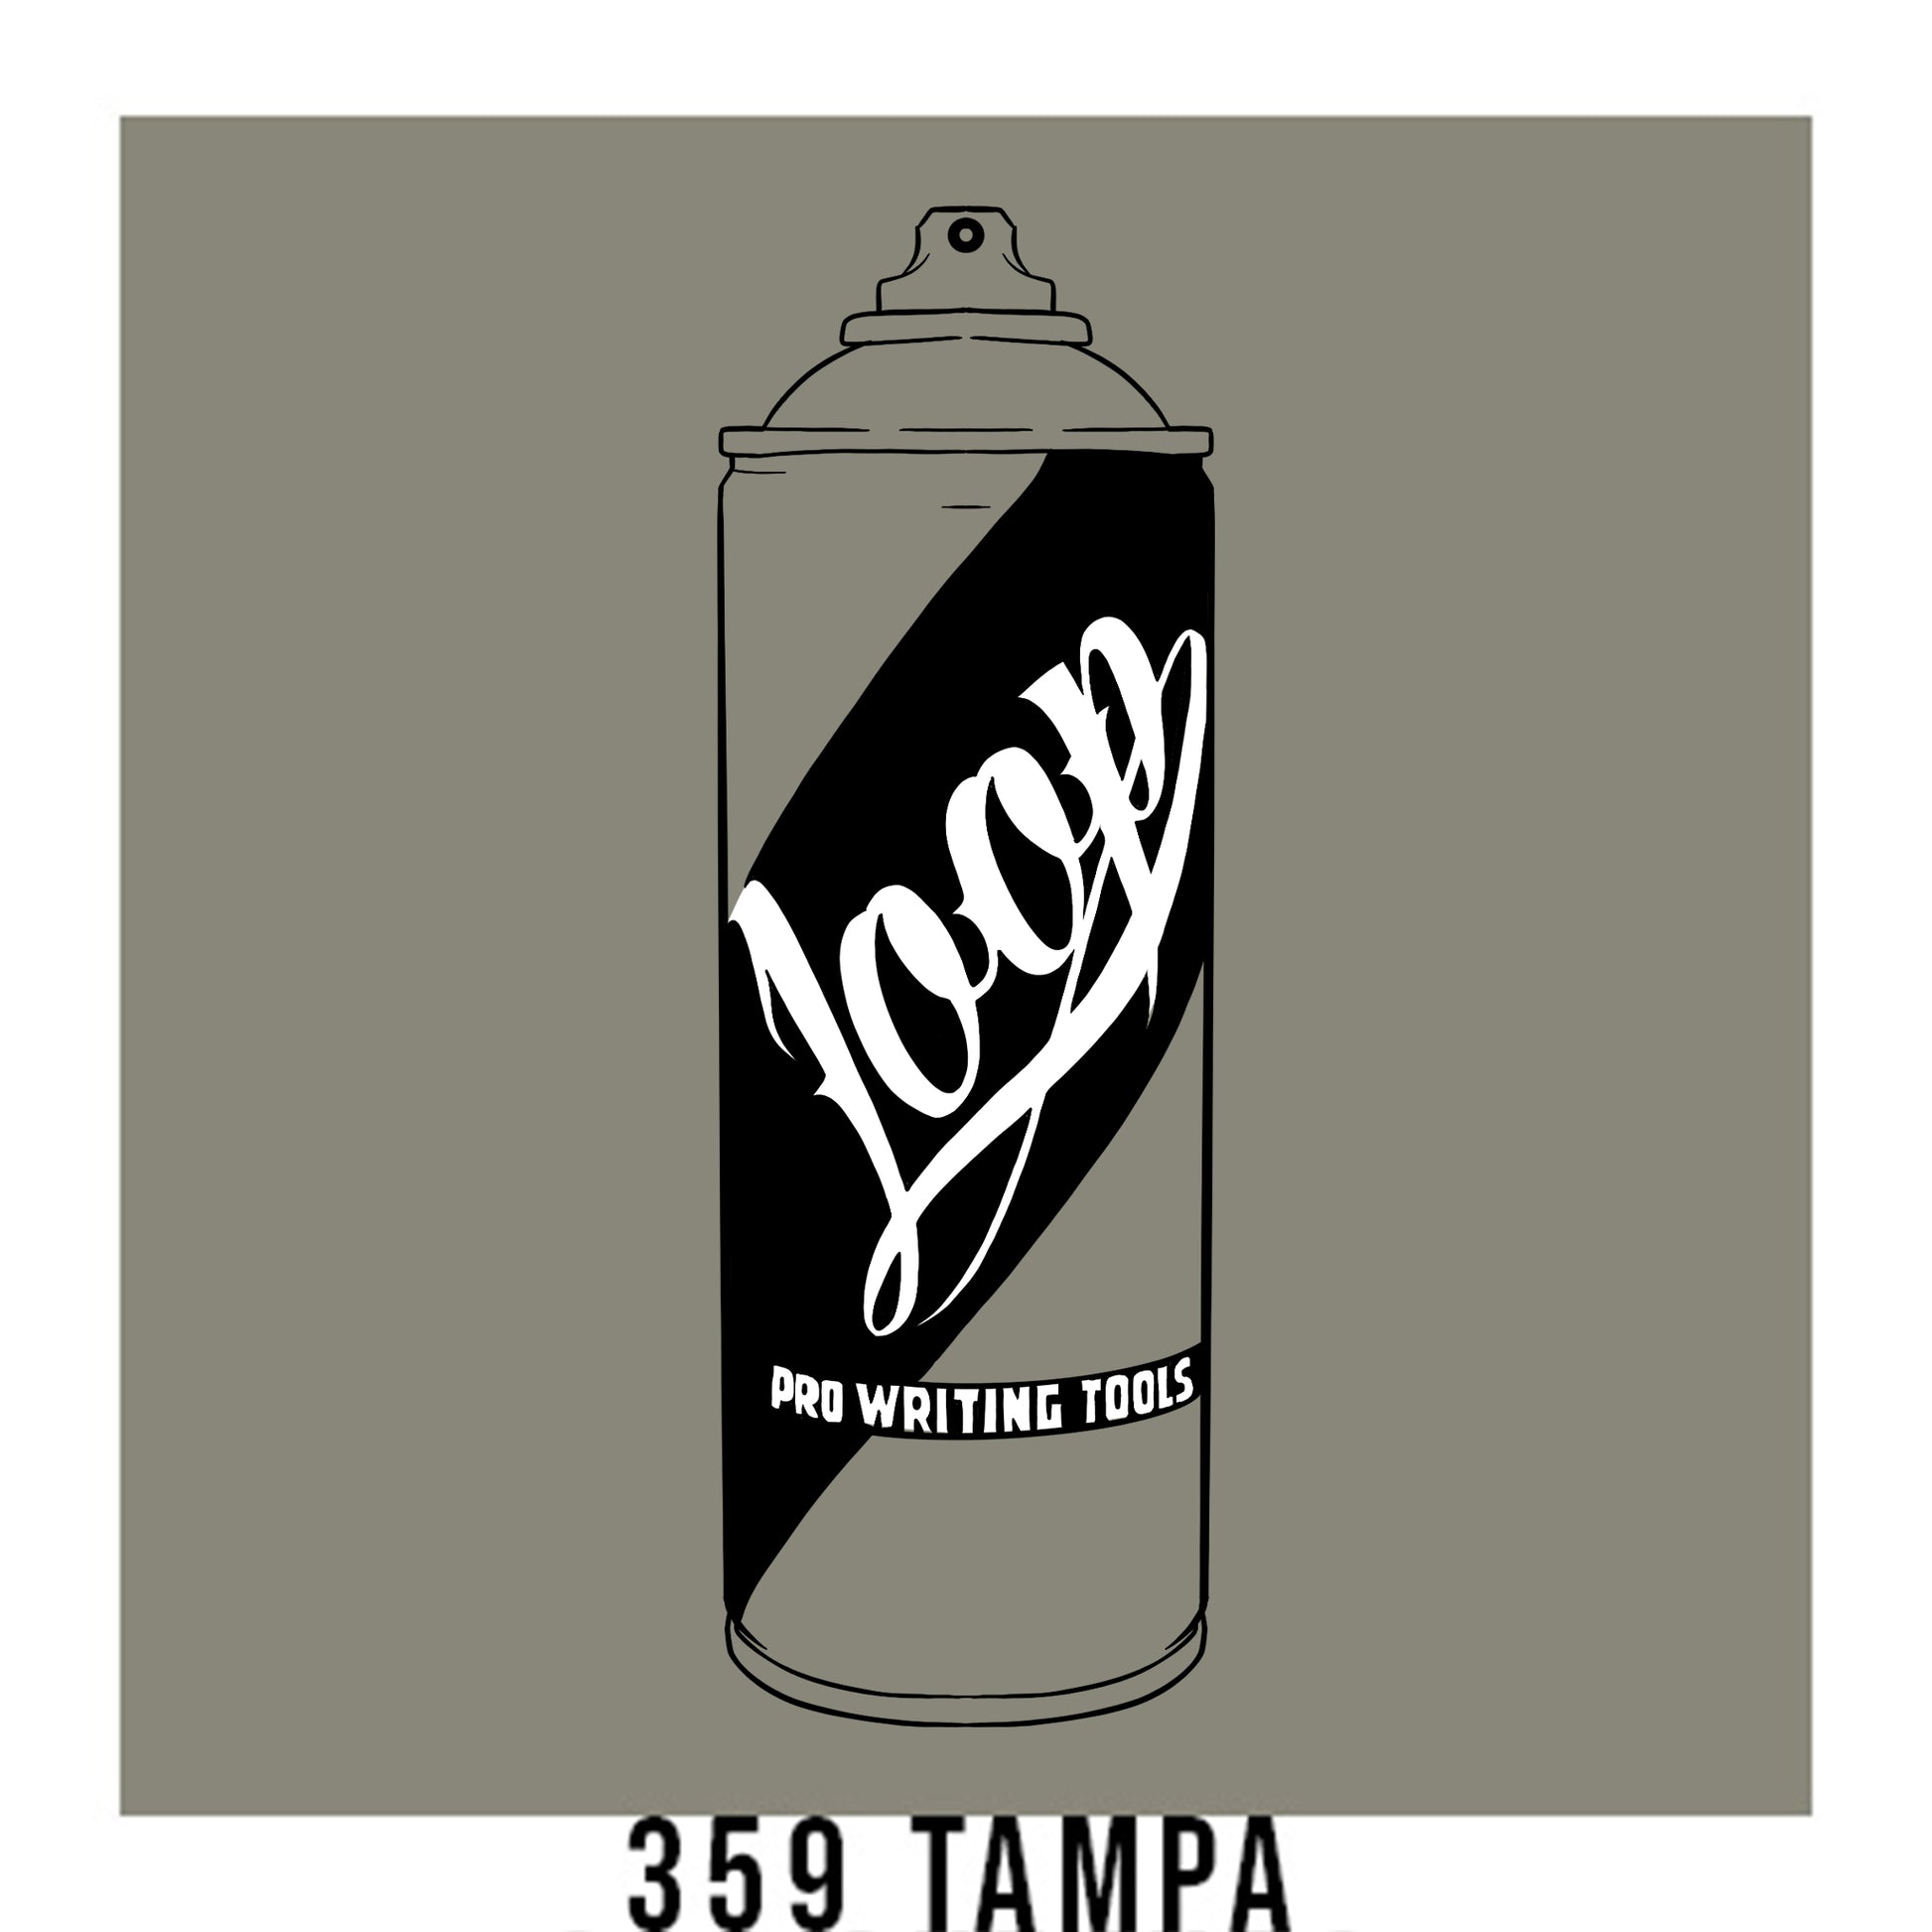 A black outline drawing of a grey spray paint can with the word "Loop" written on the face in script. The background is a color swatch of the same grey with a white border with the words "359 Tampa" at the bottom.